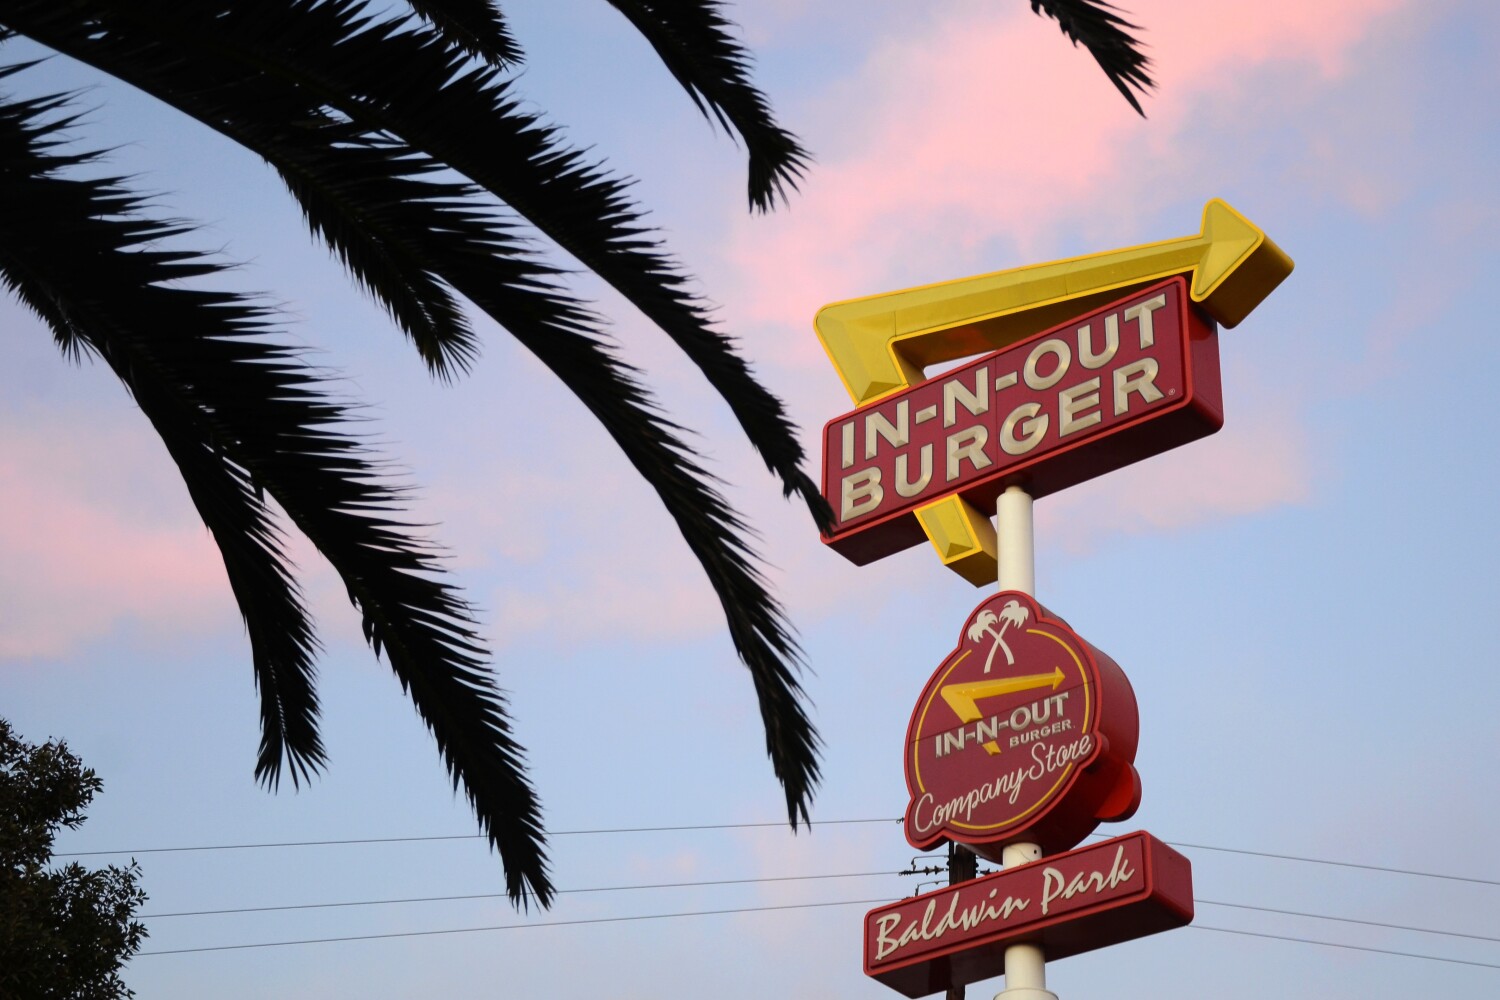 San Francisco In-N-Out temporarily closed over city's proof of COVID-19 vaccine requirement